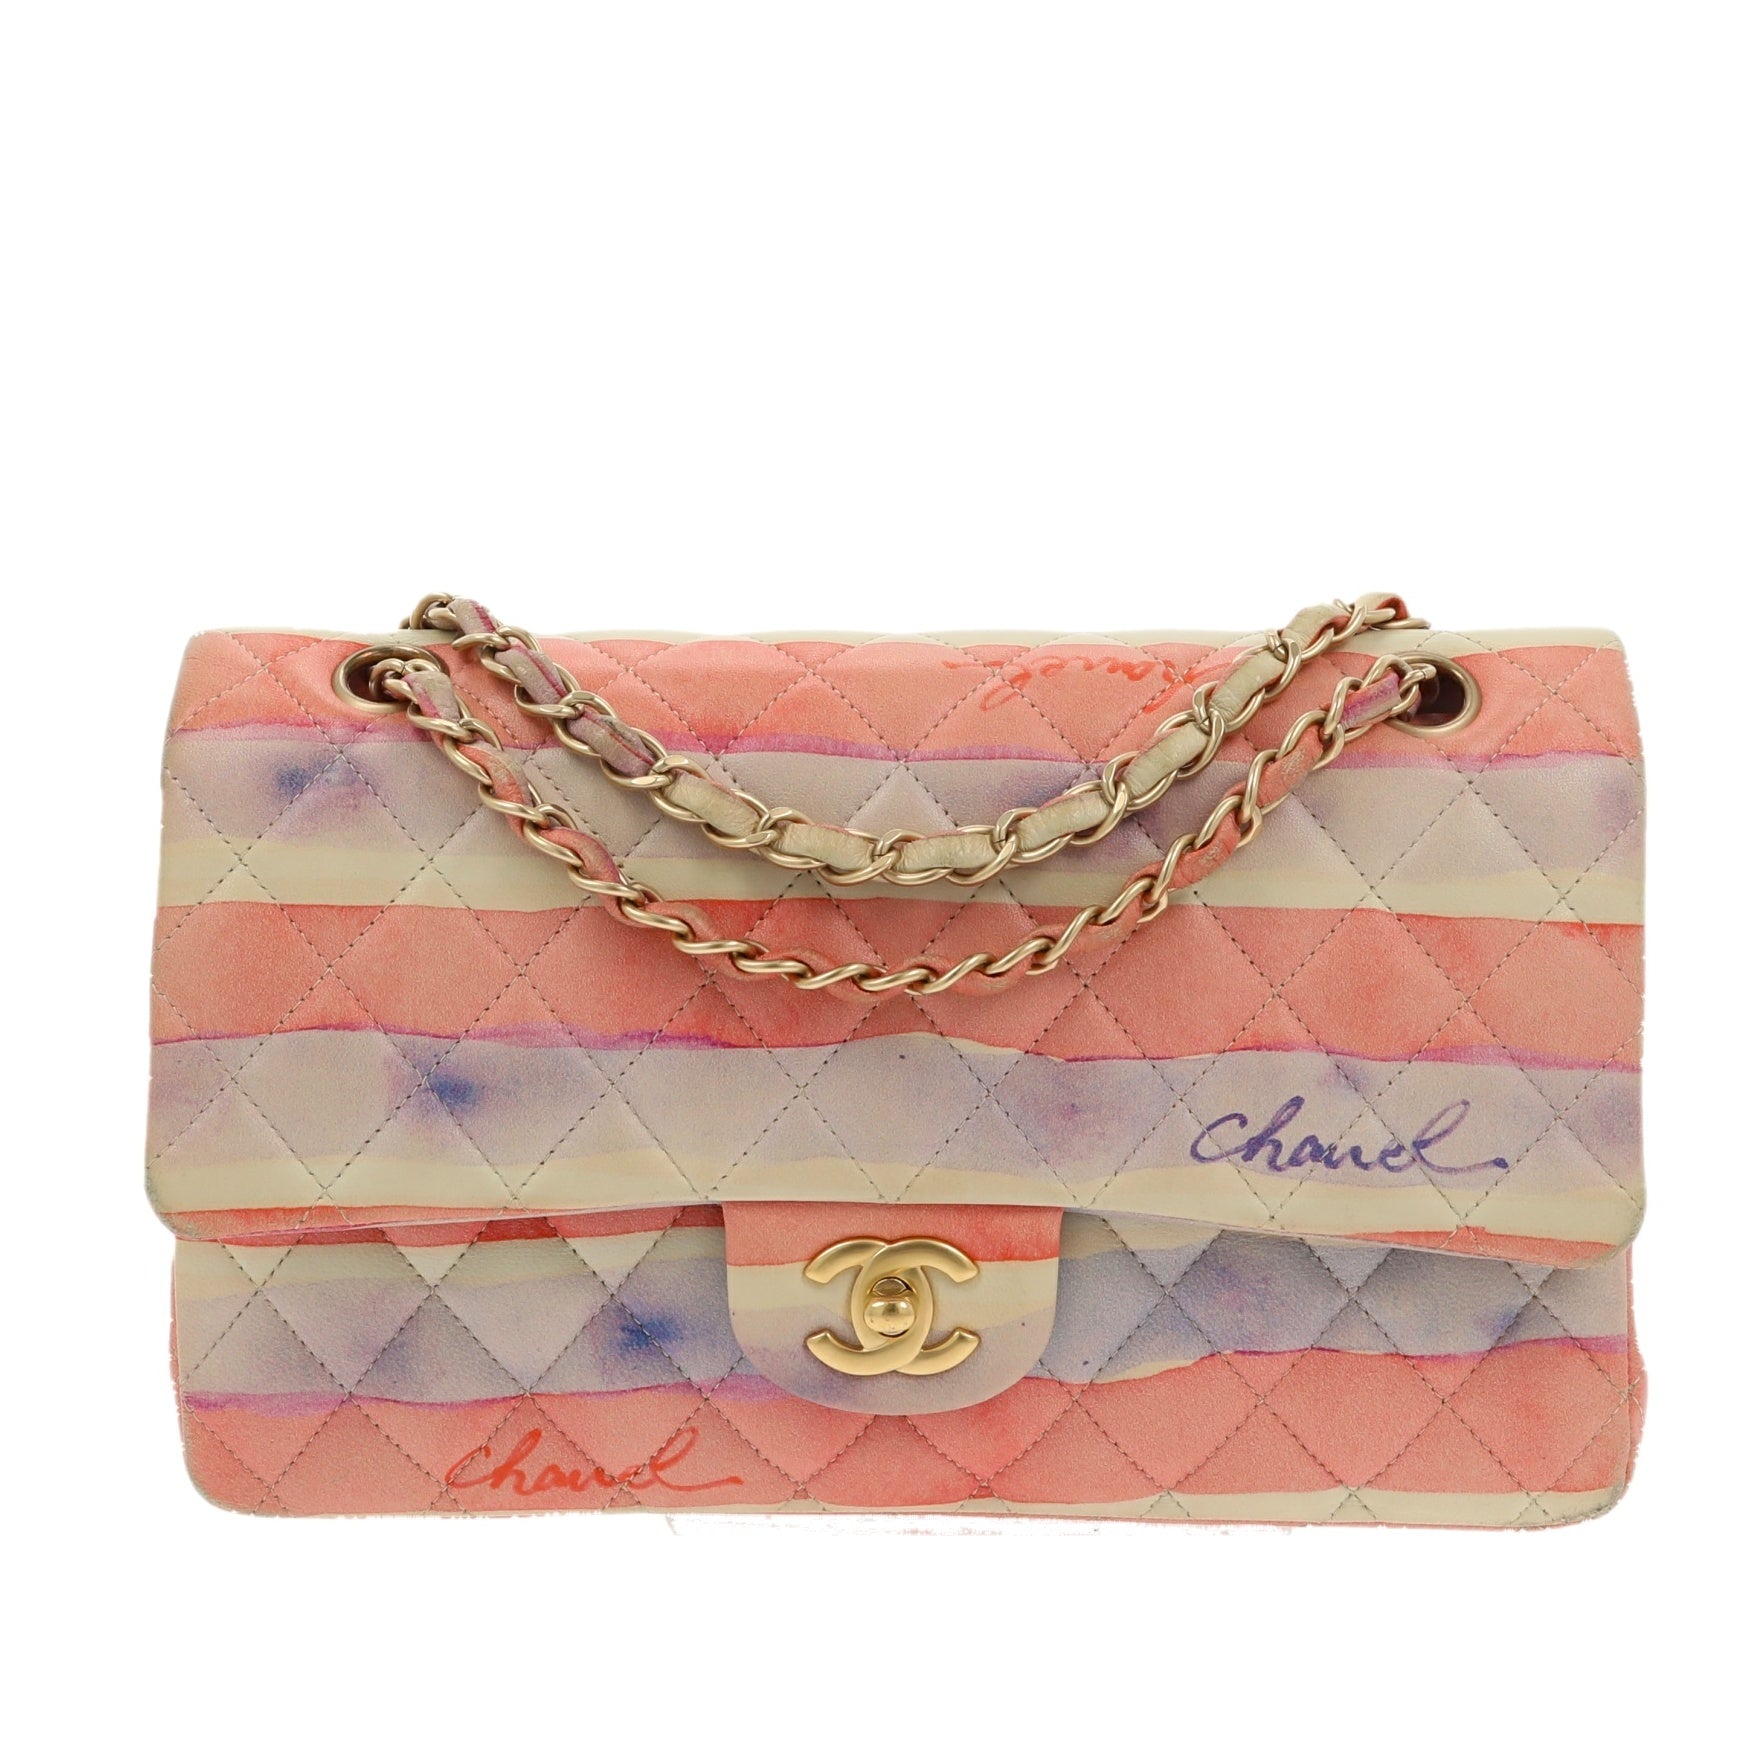 Timeless/classique leather crossbody bag Chanel Pink in Leather